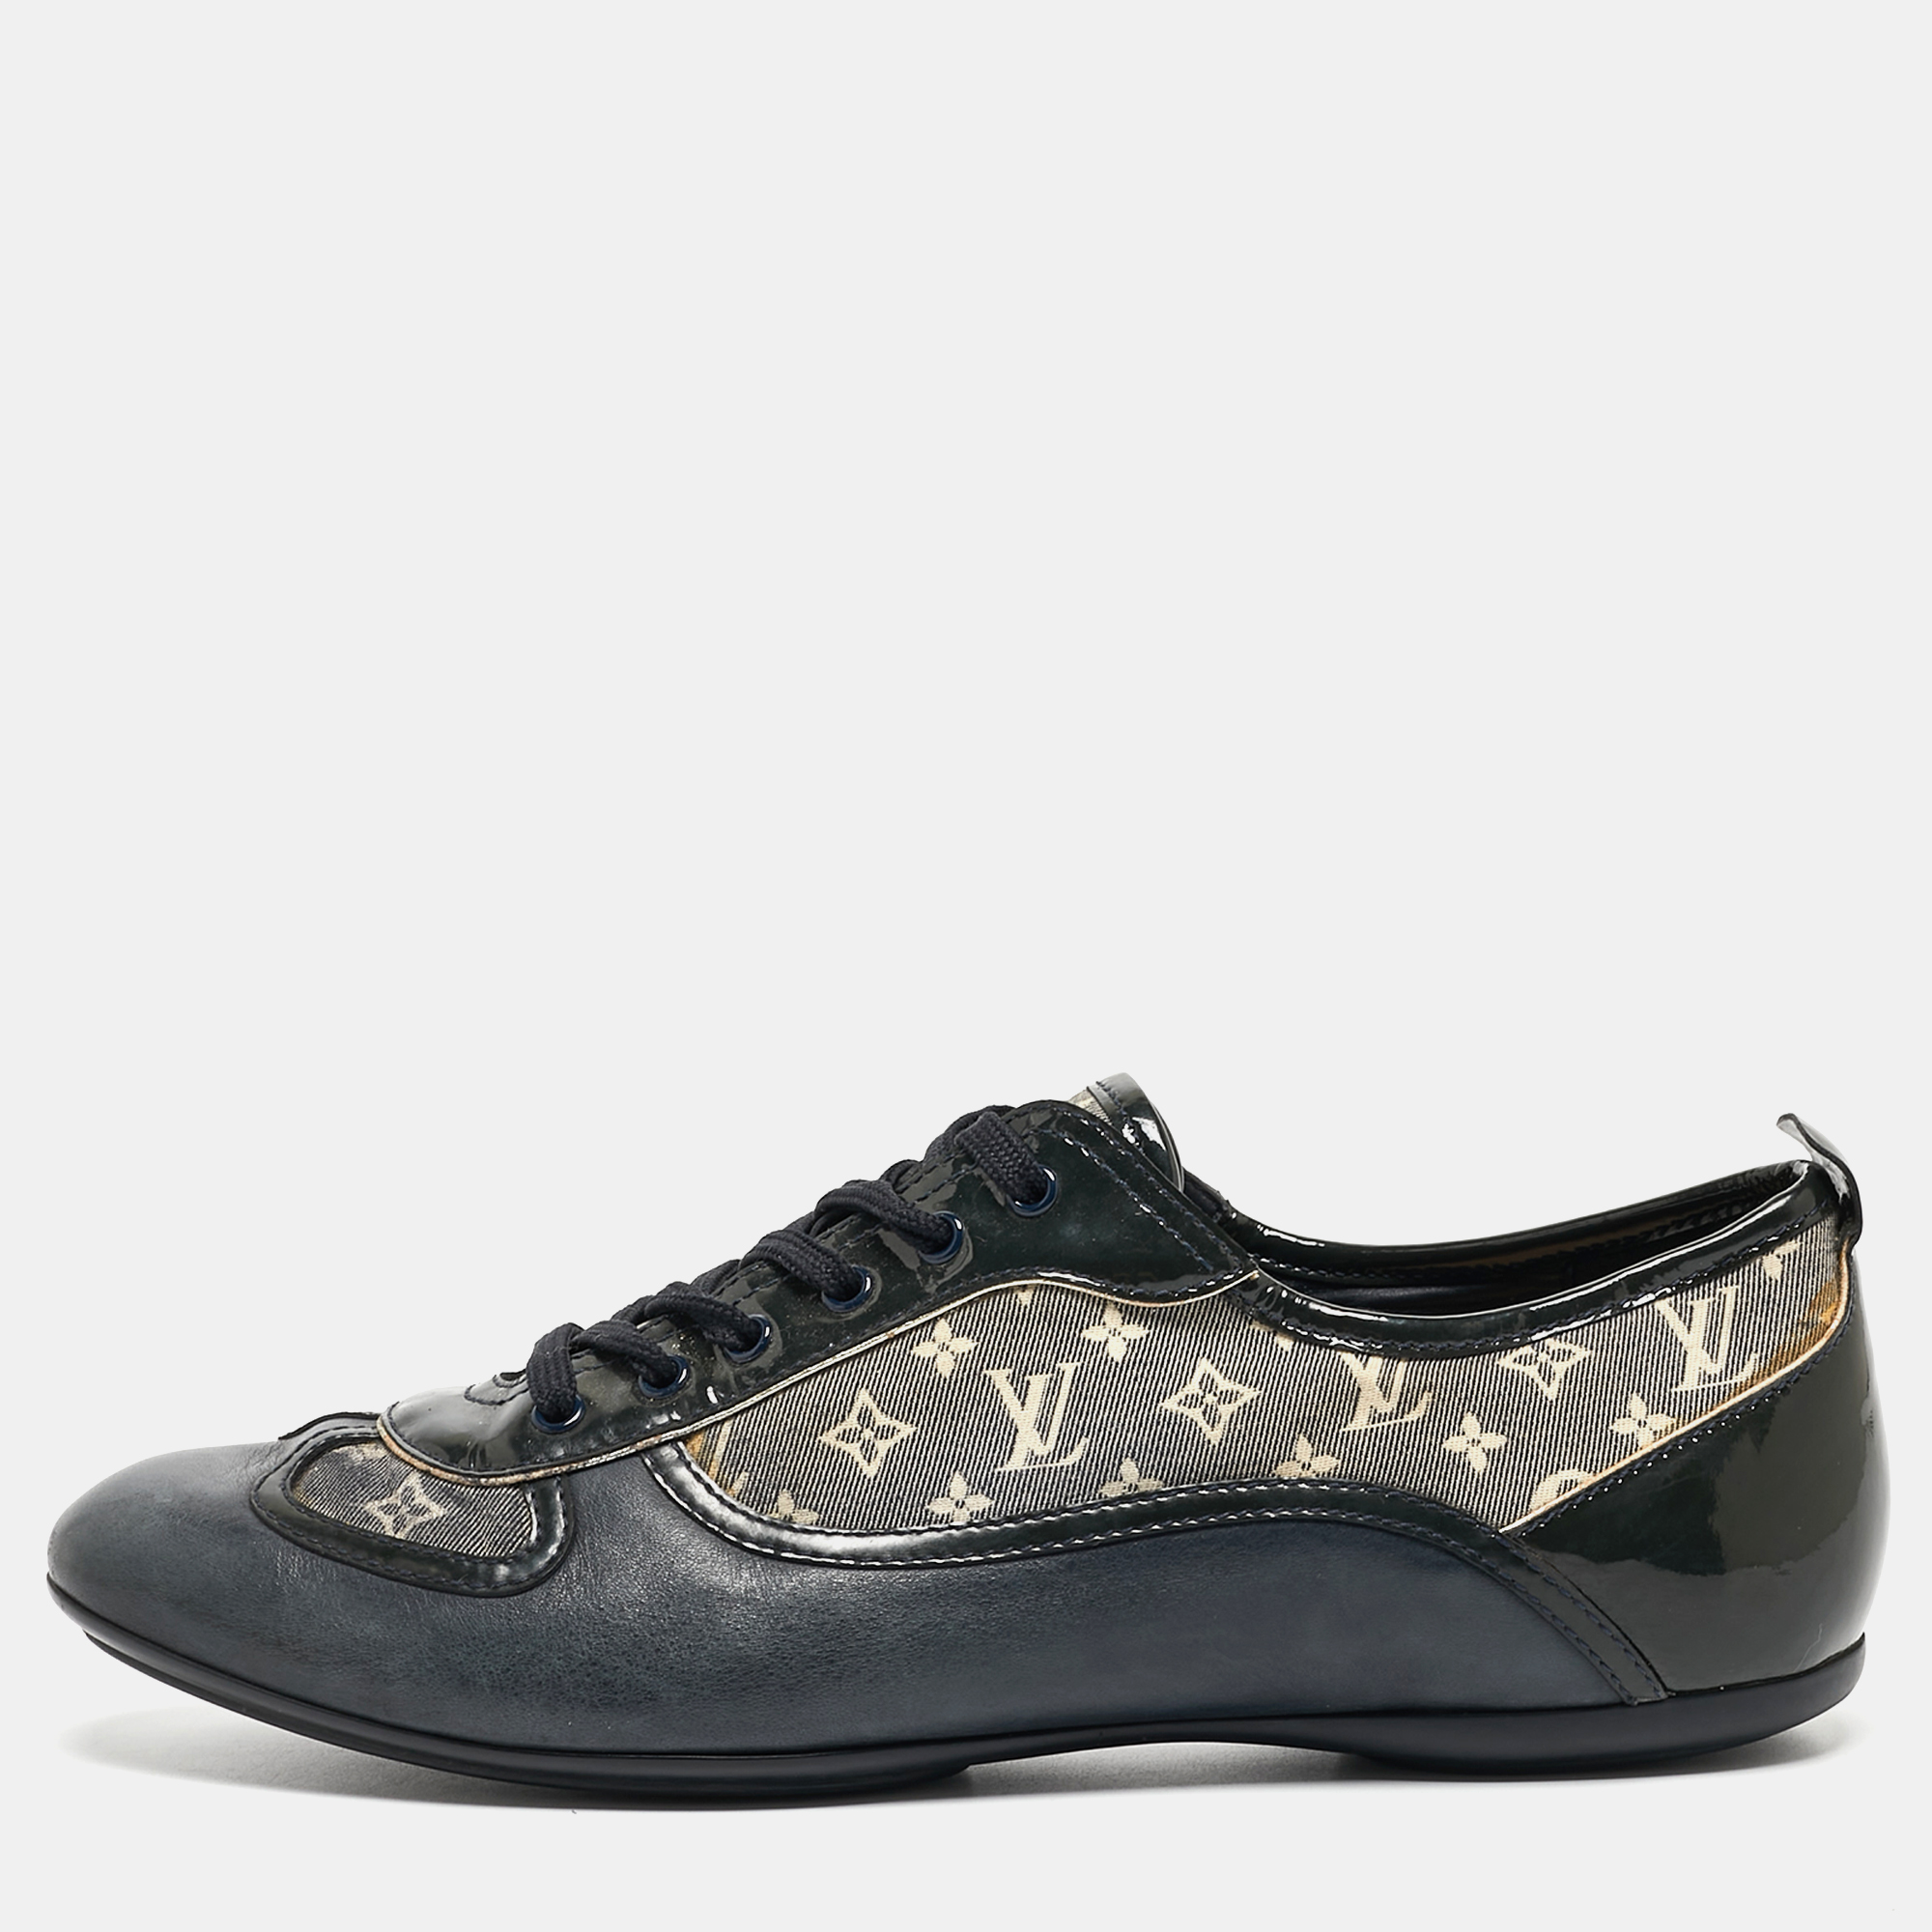 Coming in a classic silhouette these LV sneakers are a seamless combination of luxury comfort and style. These sneakers are designed with signature details and comfortable insoles.